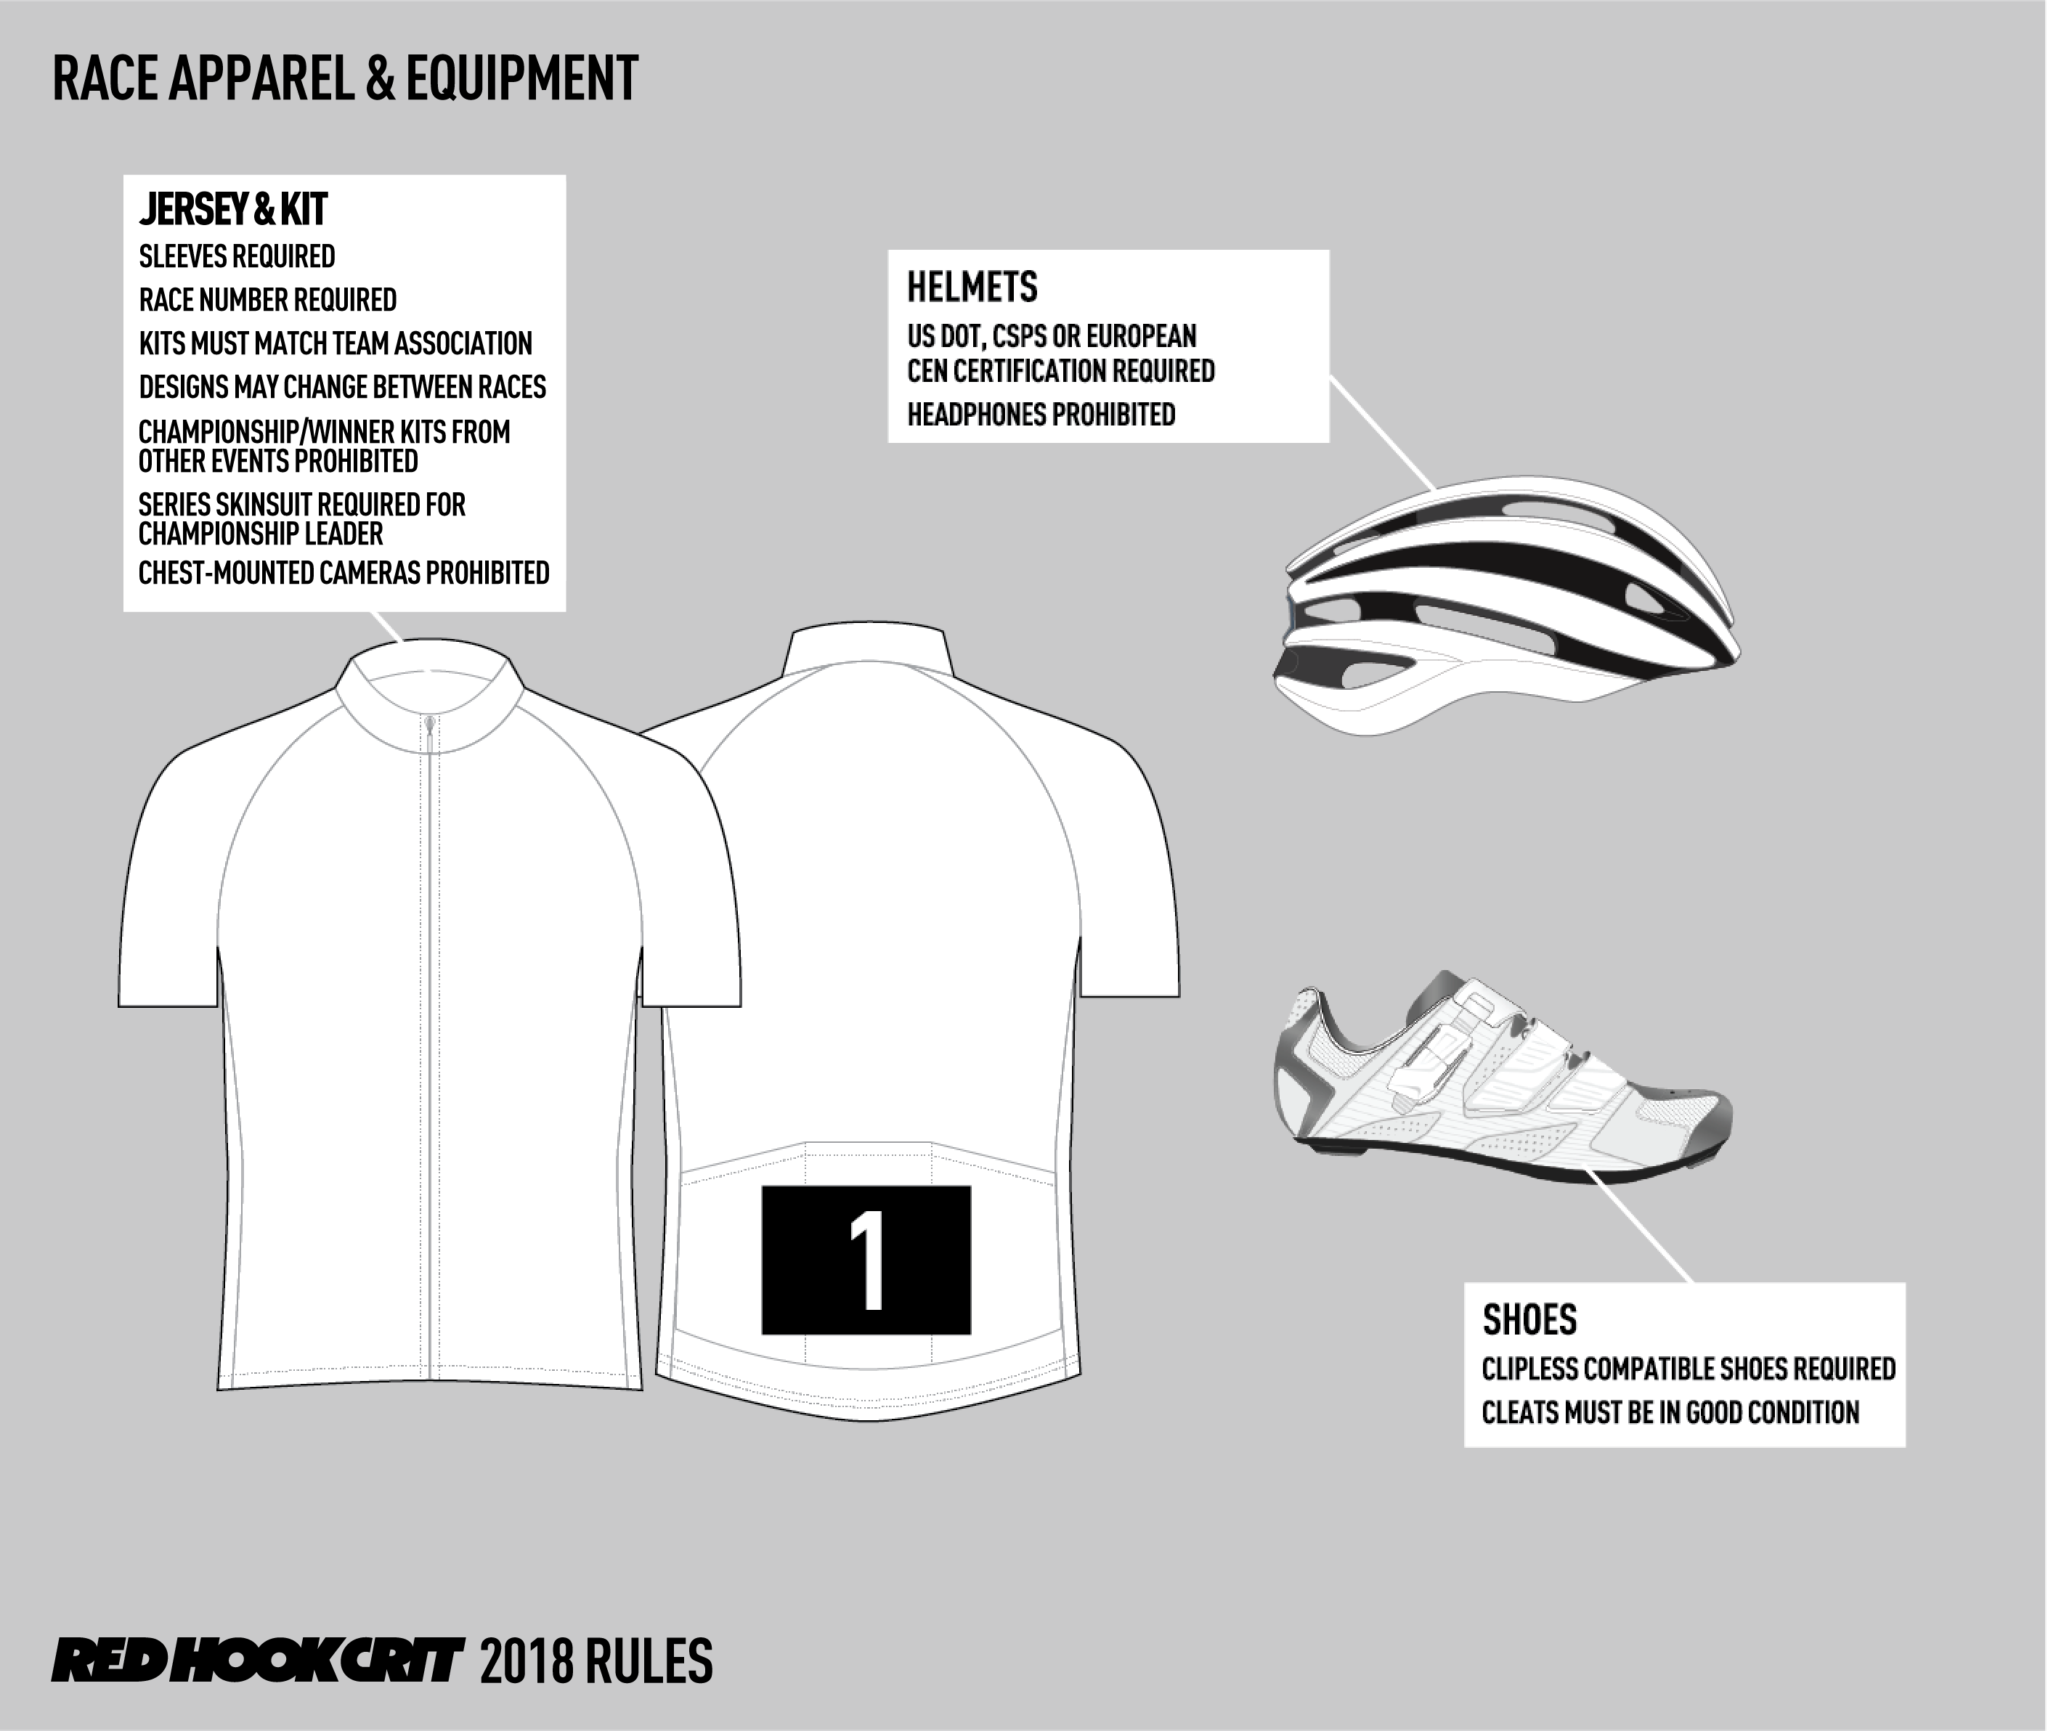 Race Apparel and Equipment Rules Diagram